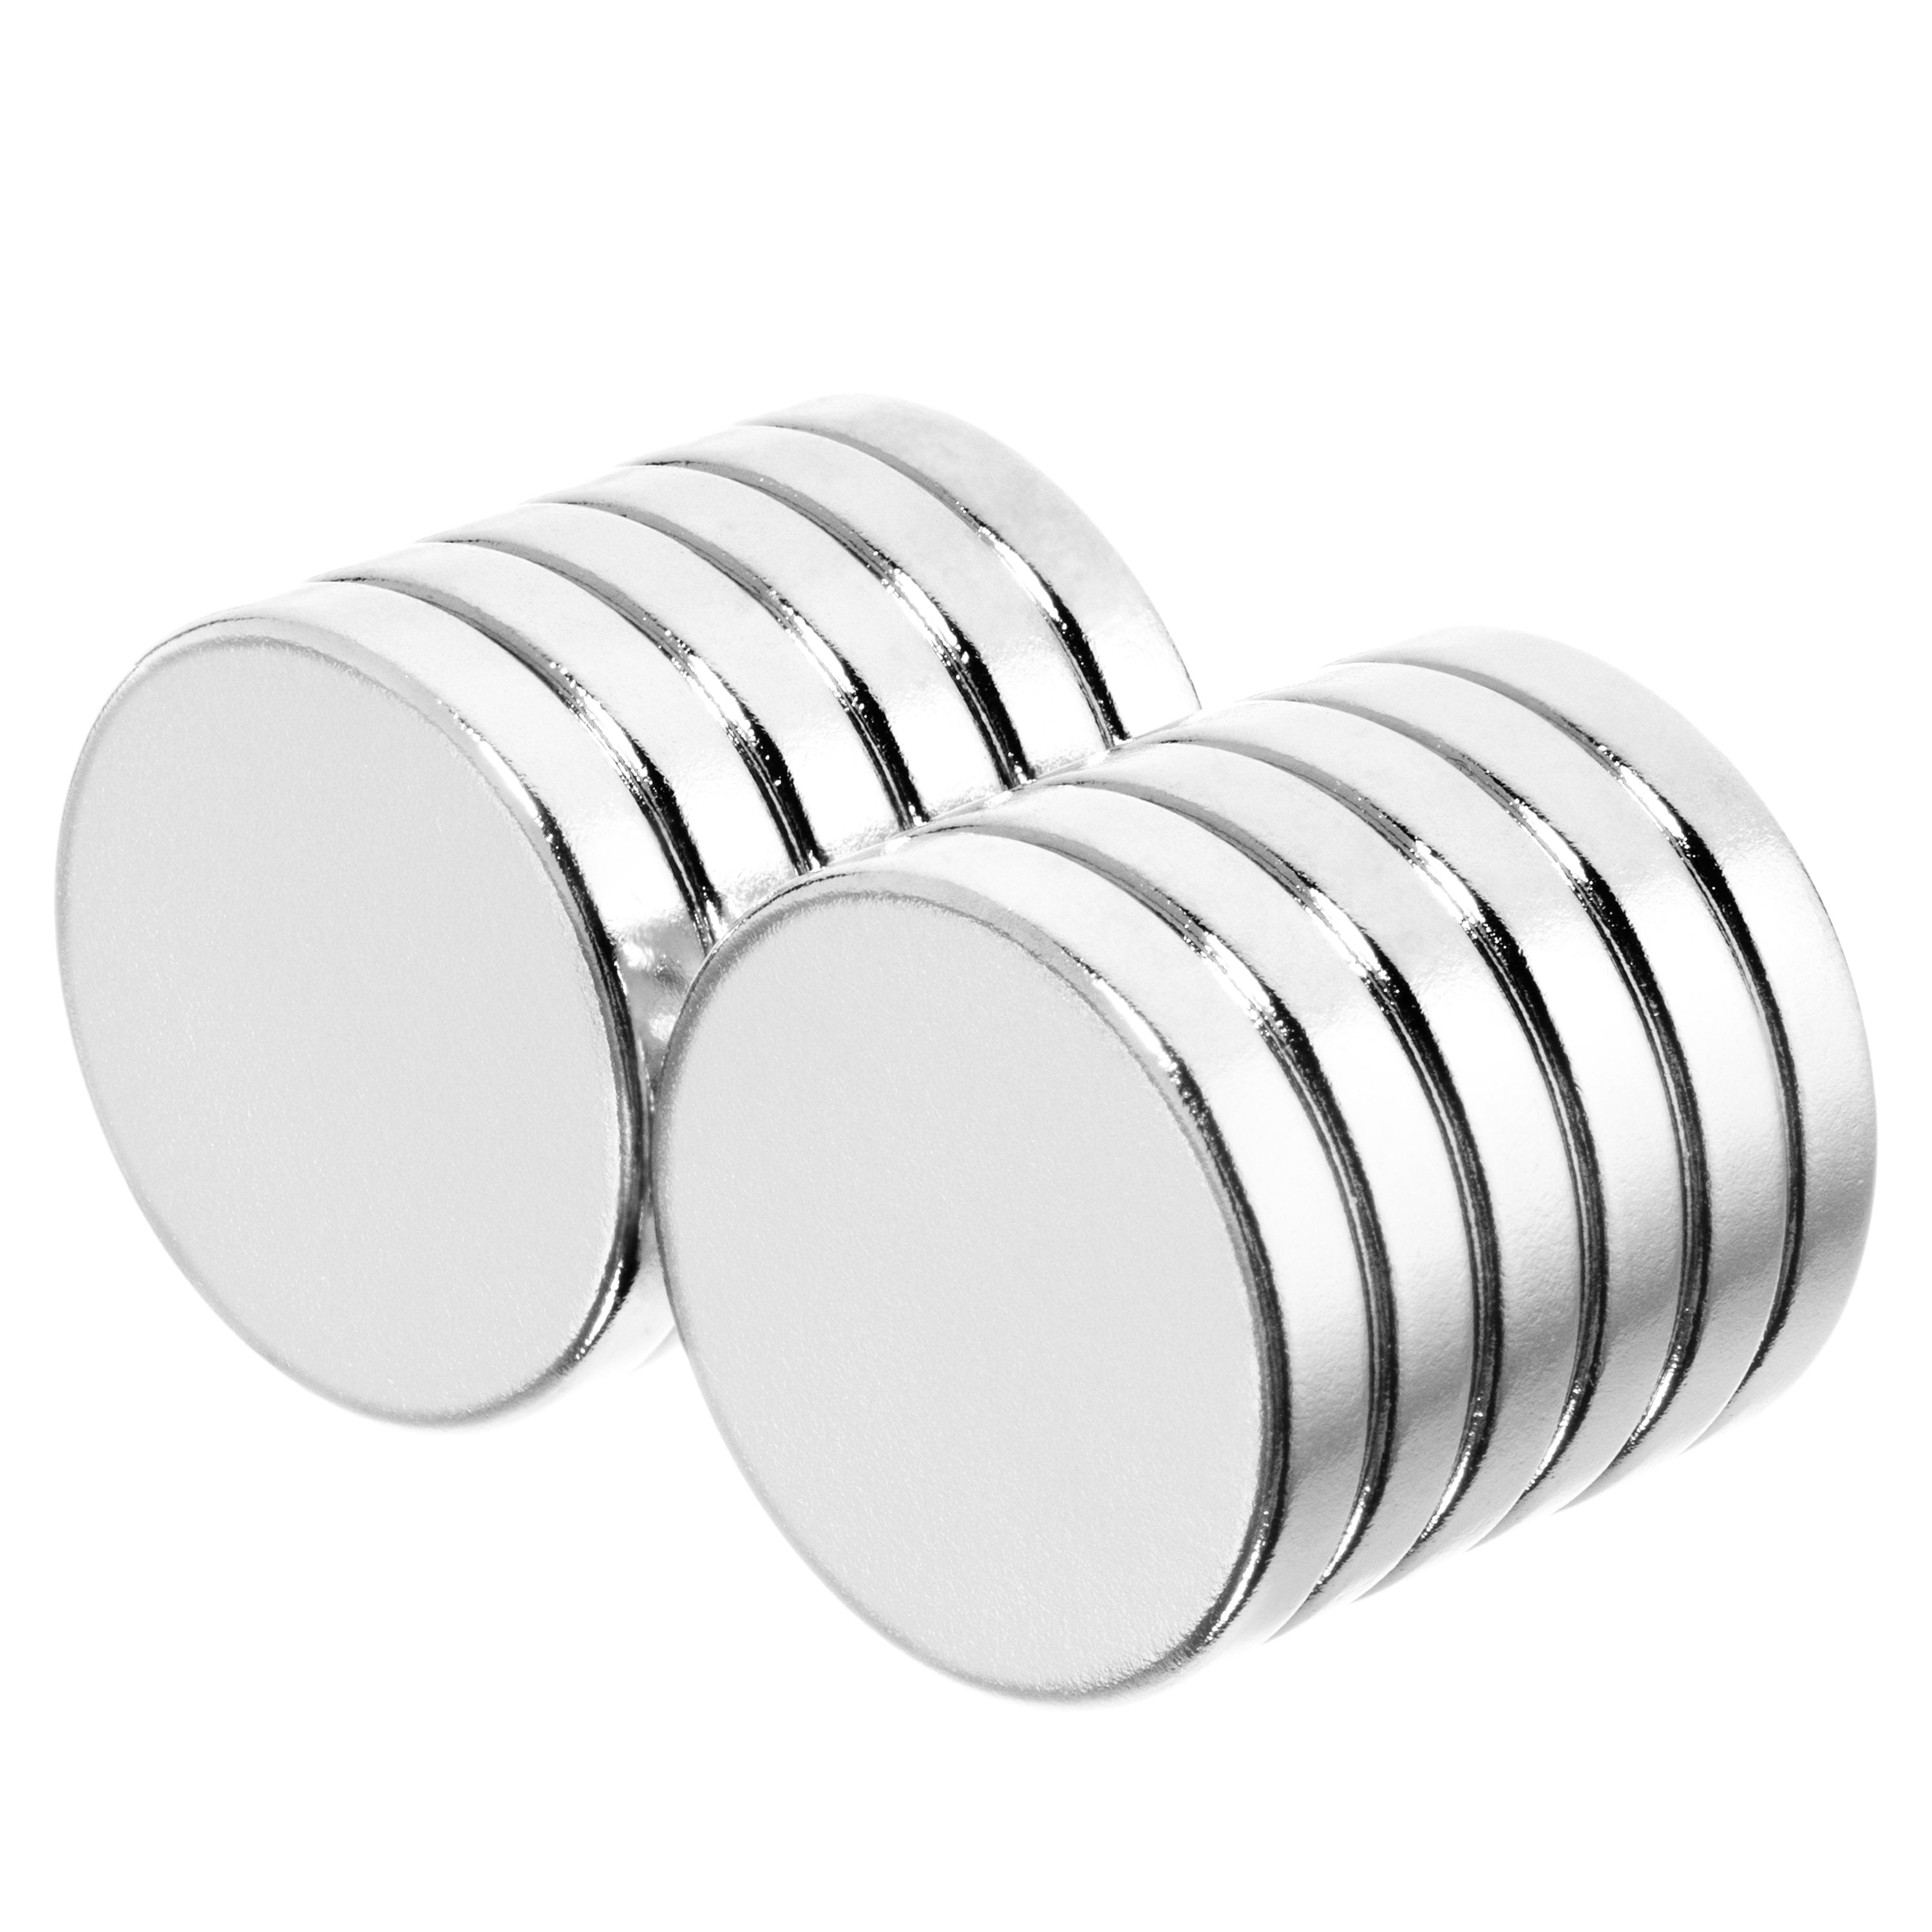 50mm x 10mm N52 Super Strong Rare Earth Neodymium Magnet Disc 2in x 3/8in 